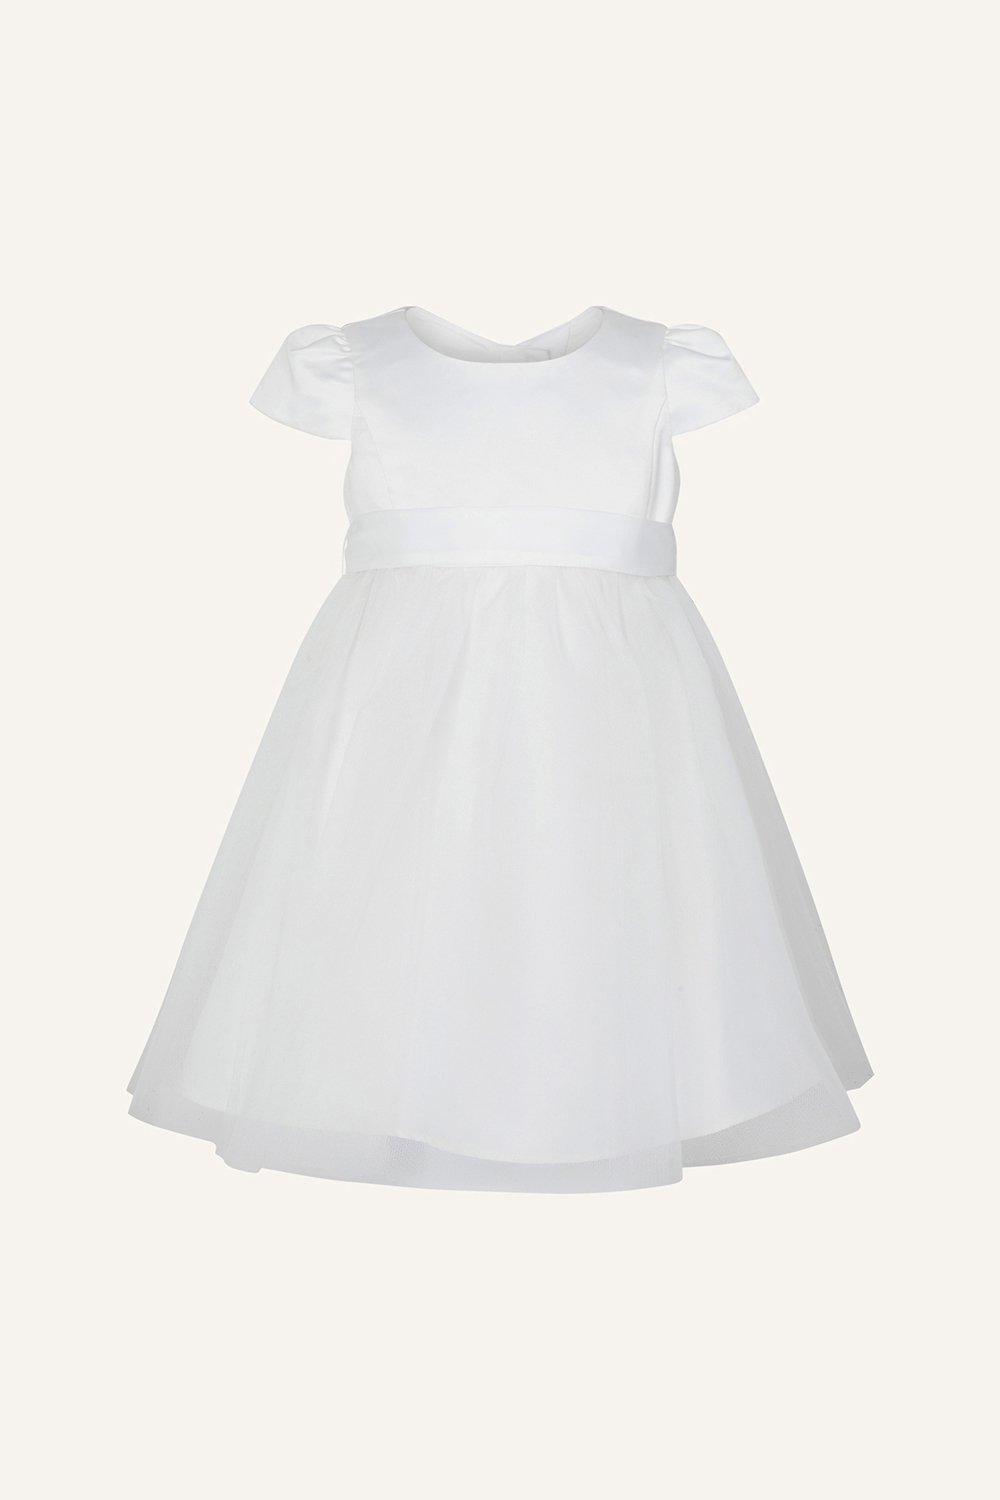 Baby Tulle Bridesmaid Dress